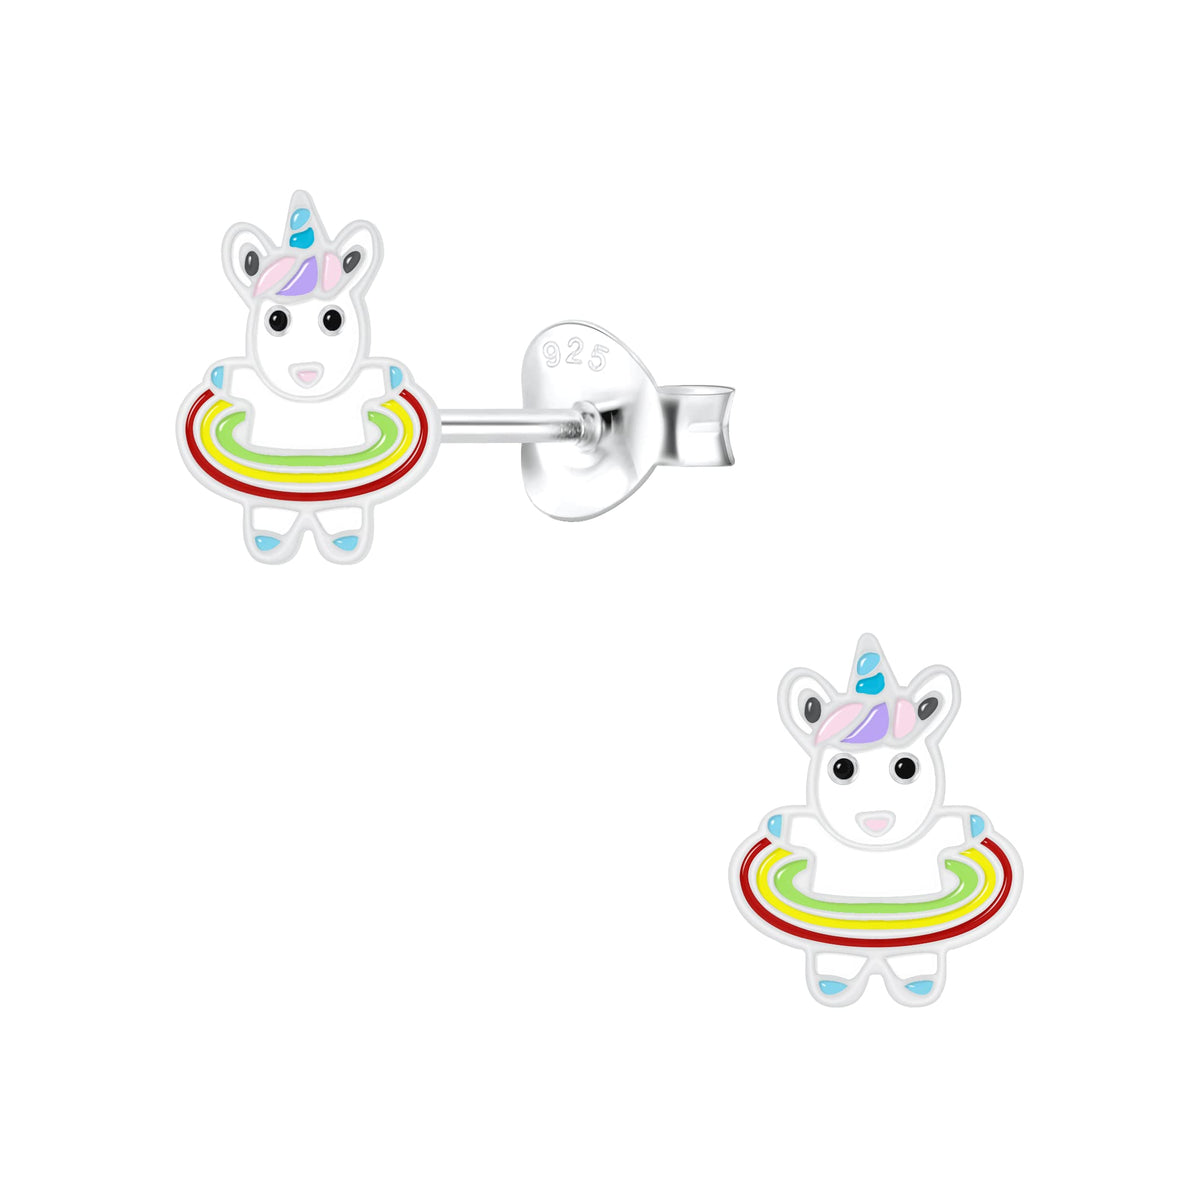 Raajsi by Yellow Chimes 925 Sterling Silver Stud Earring for Girls & Kids Melbees Kids Collection Unicorn Designed |Birthday Gift for Girls Kids | With Certificate of Authenticity & 6 Month Warranty